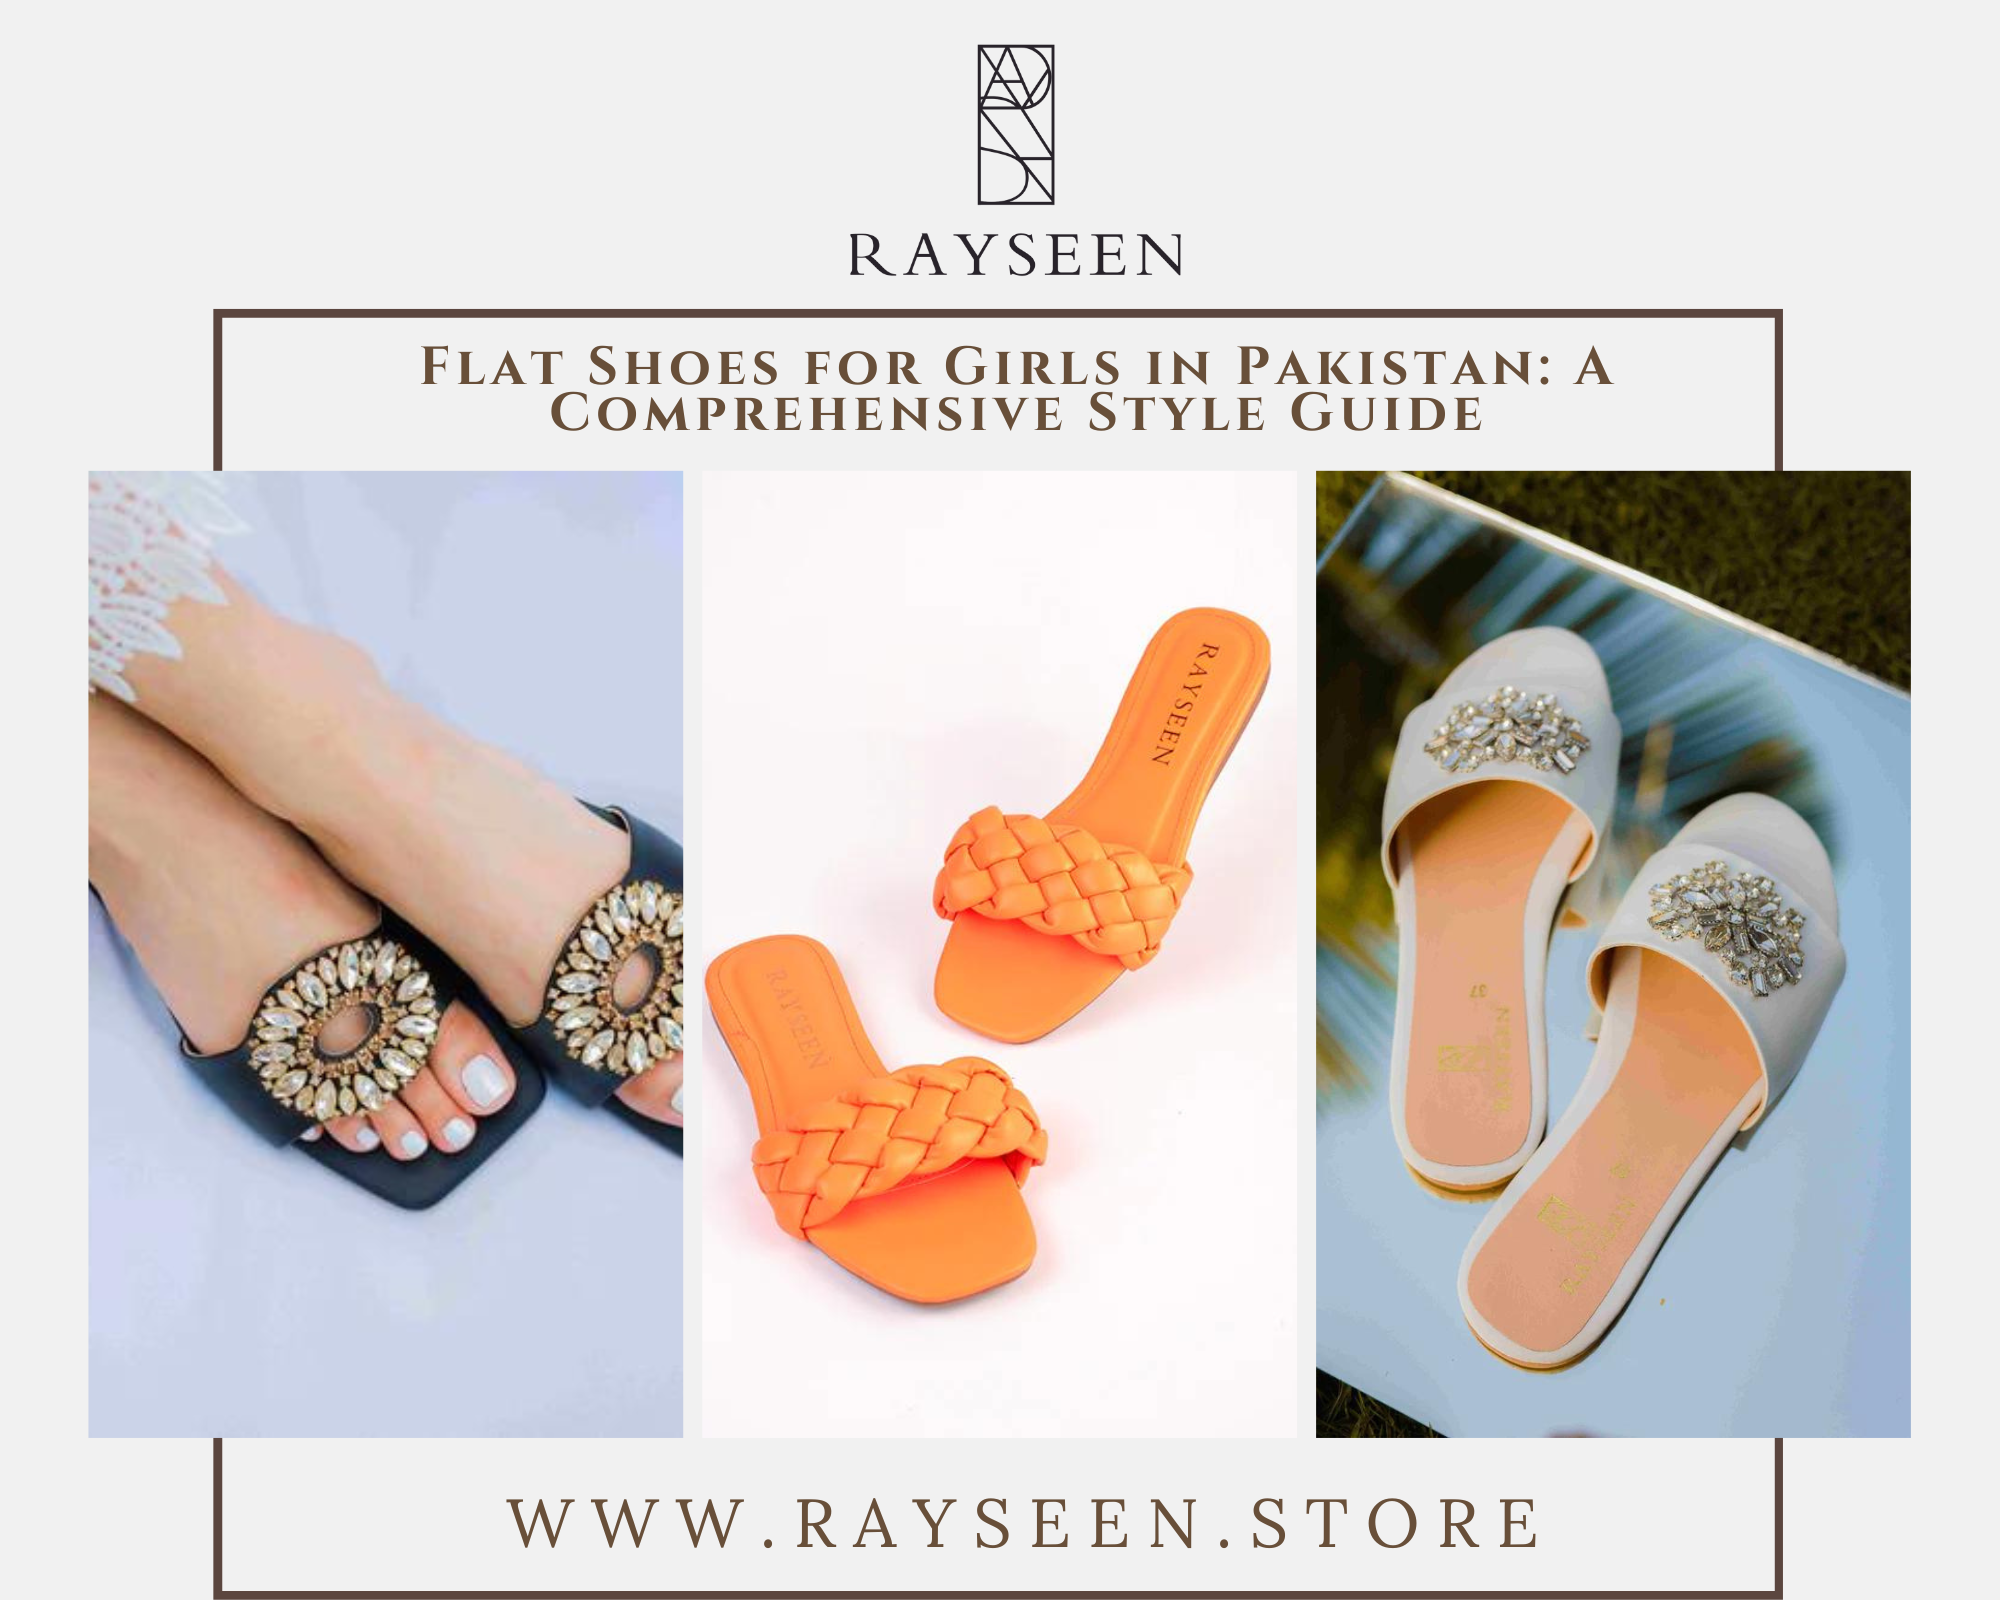 Flat Shoes for Girls in Pakistan - Rayseen Store